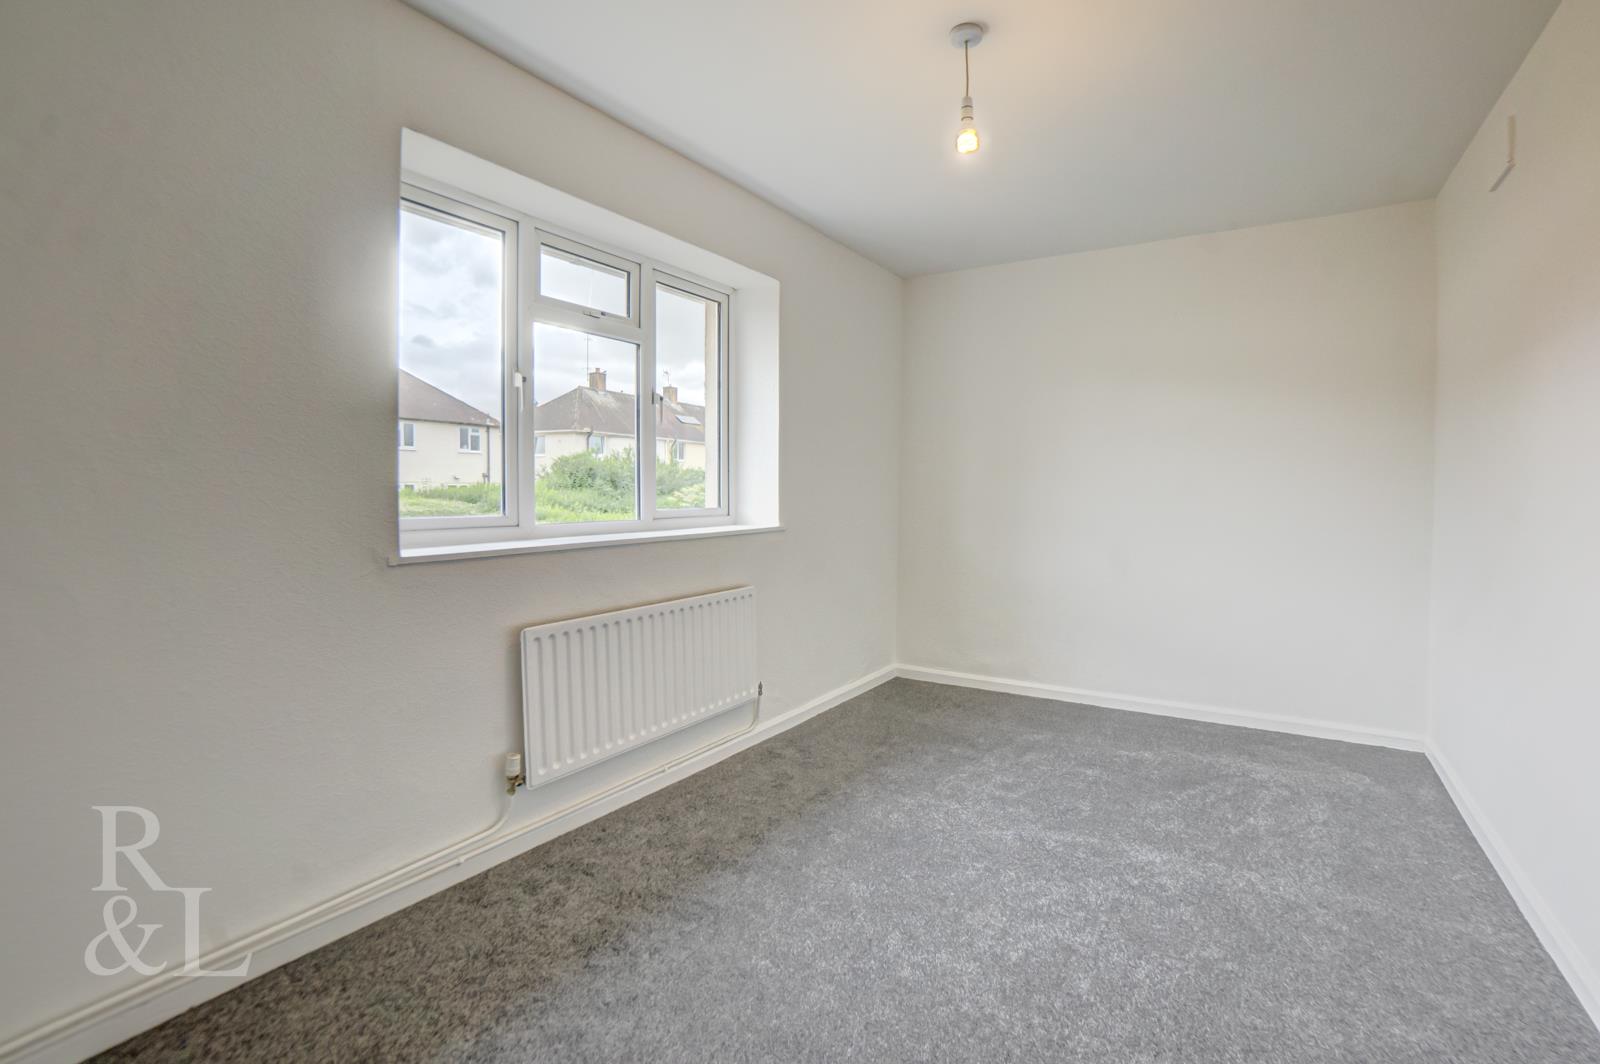 Property image for Brooksby Lane, Clifton, Nottingham